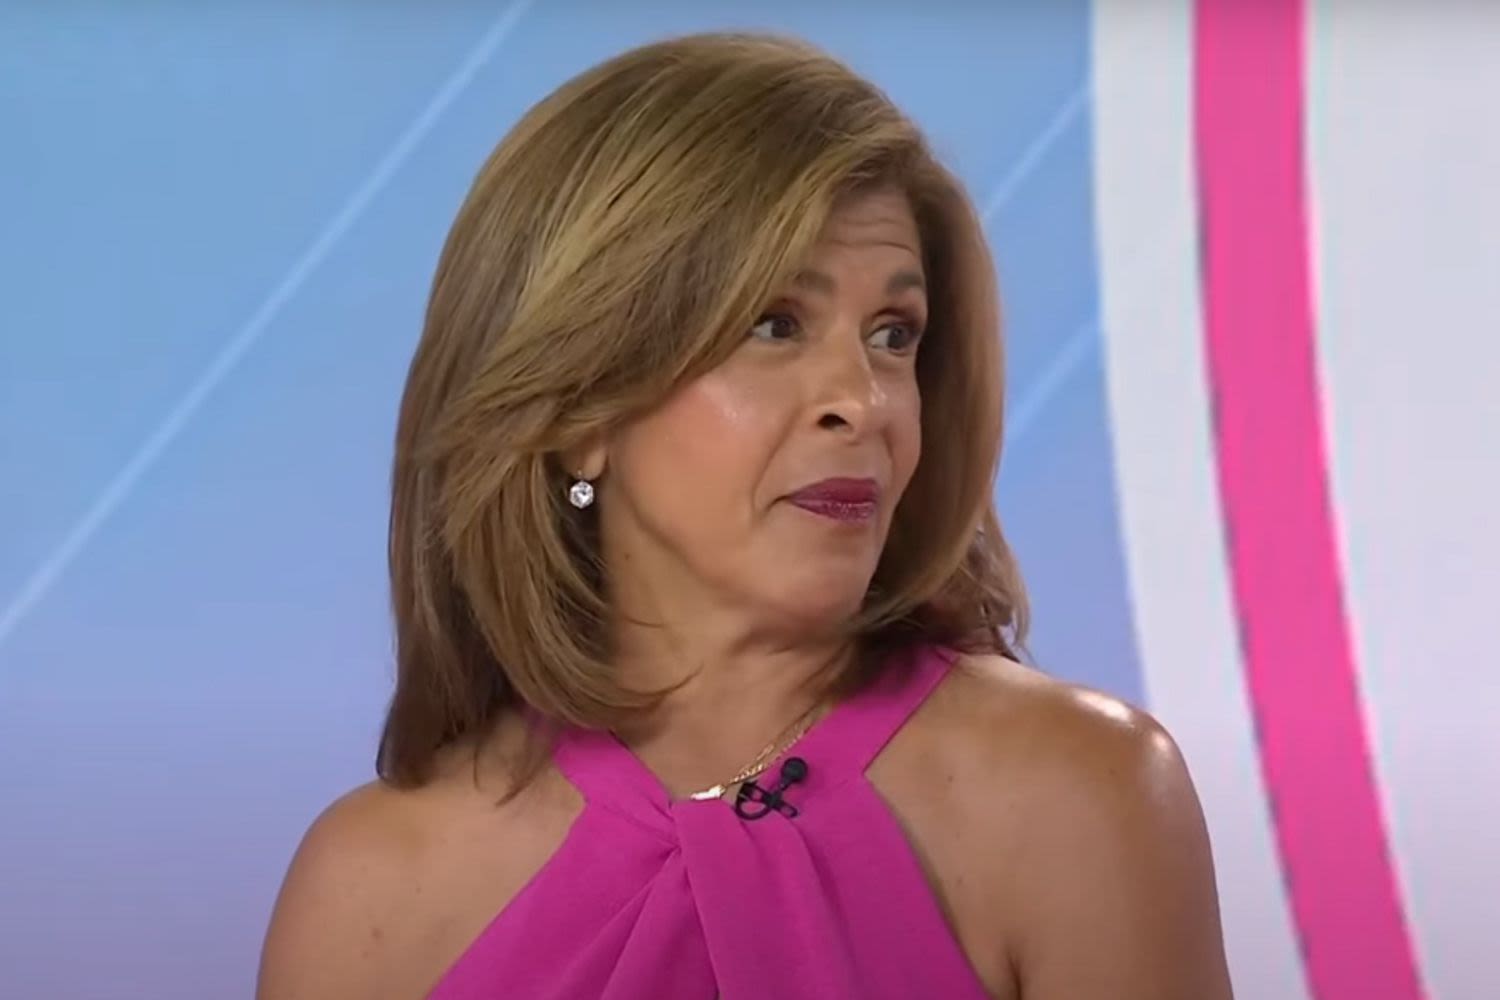 Hoda Kotb Jokes About Her Disappointment Over the 'Law & Order: SVU' Role She Got